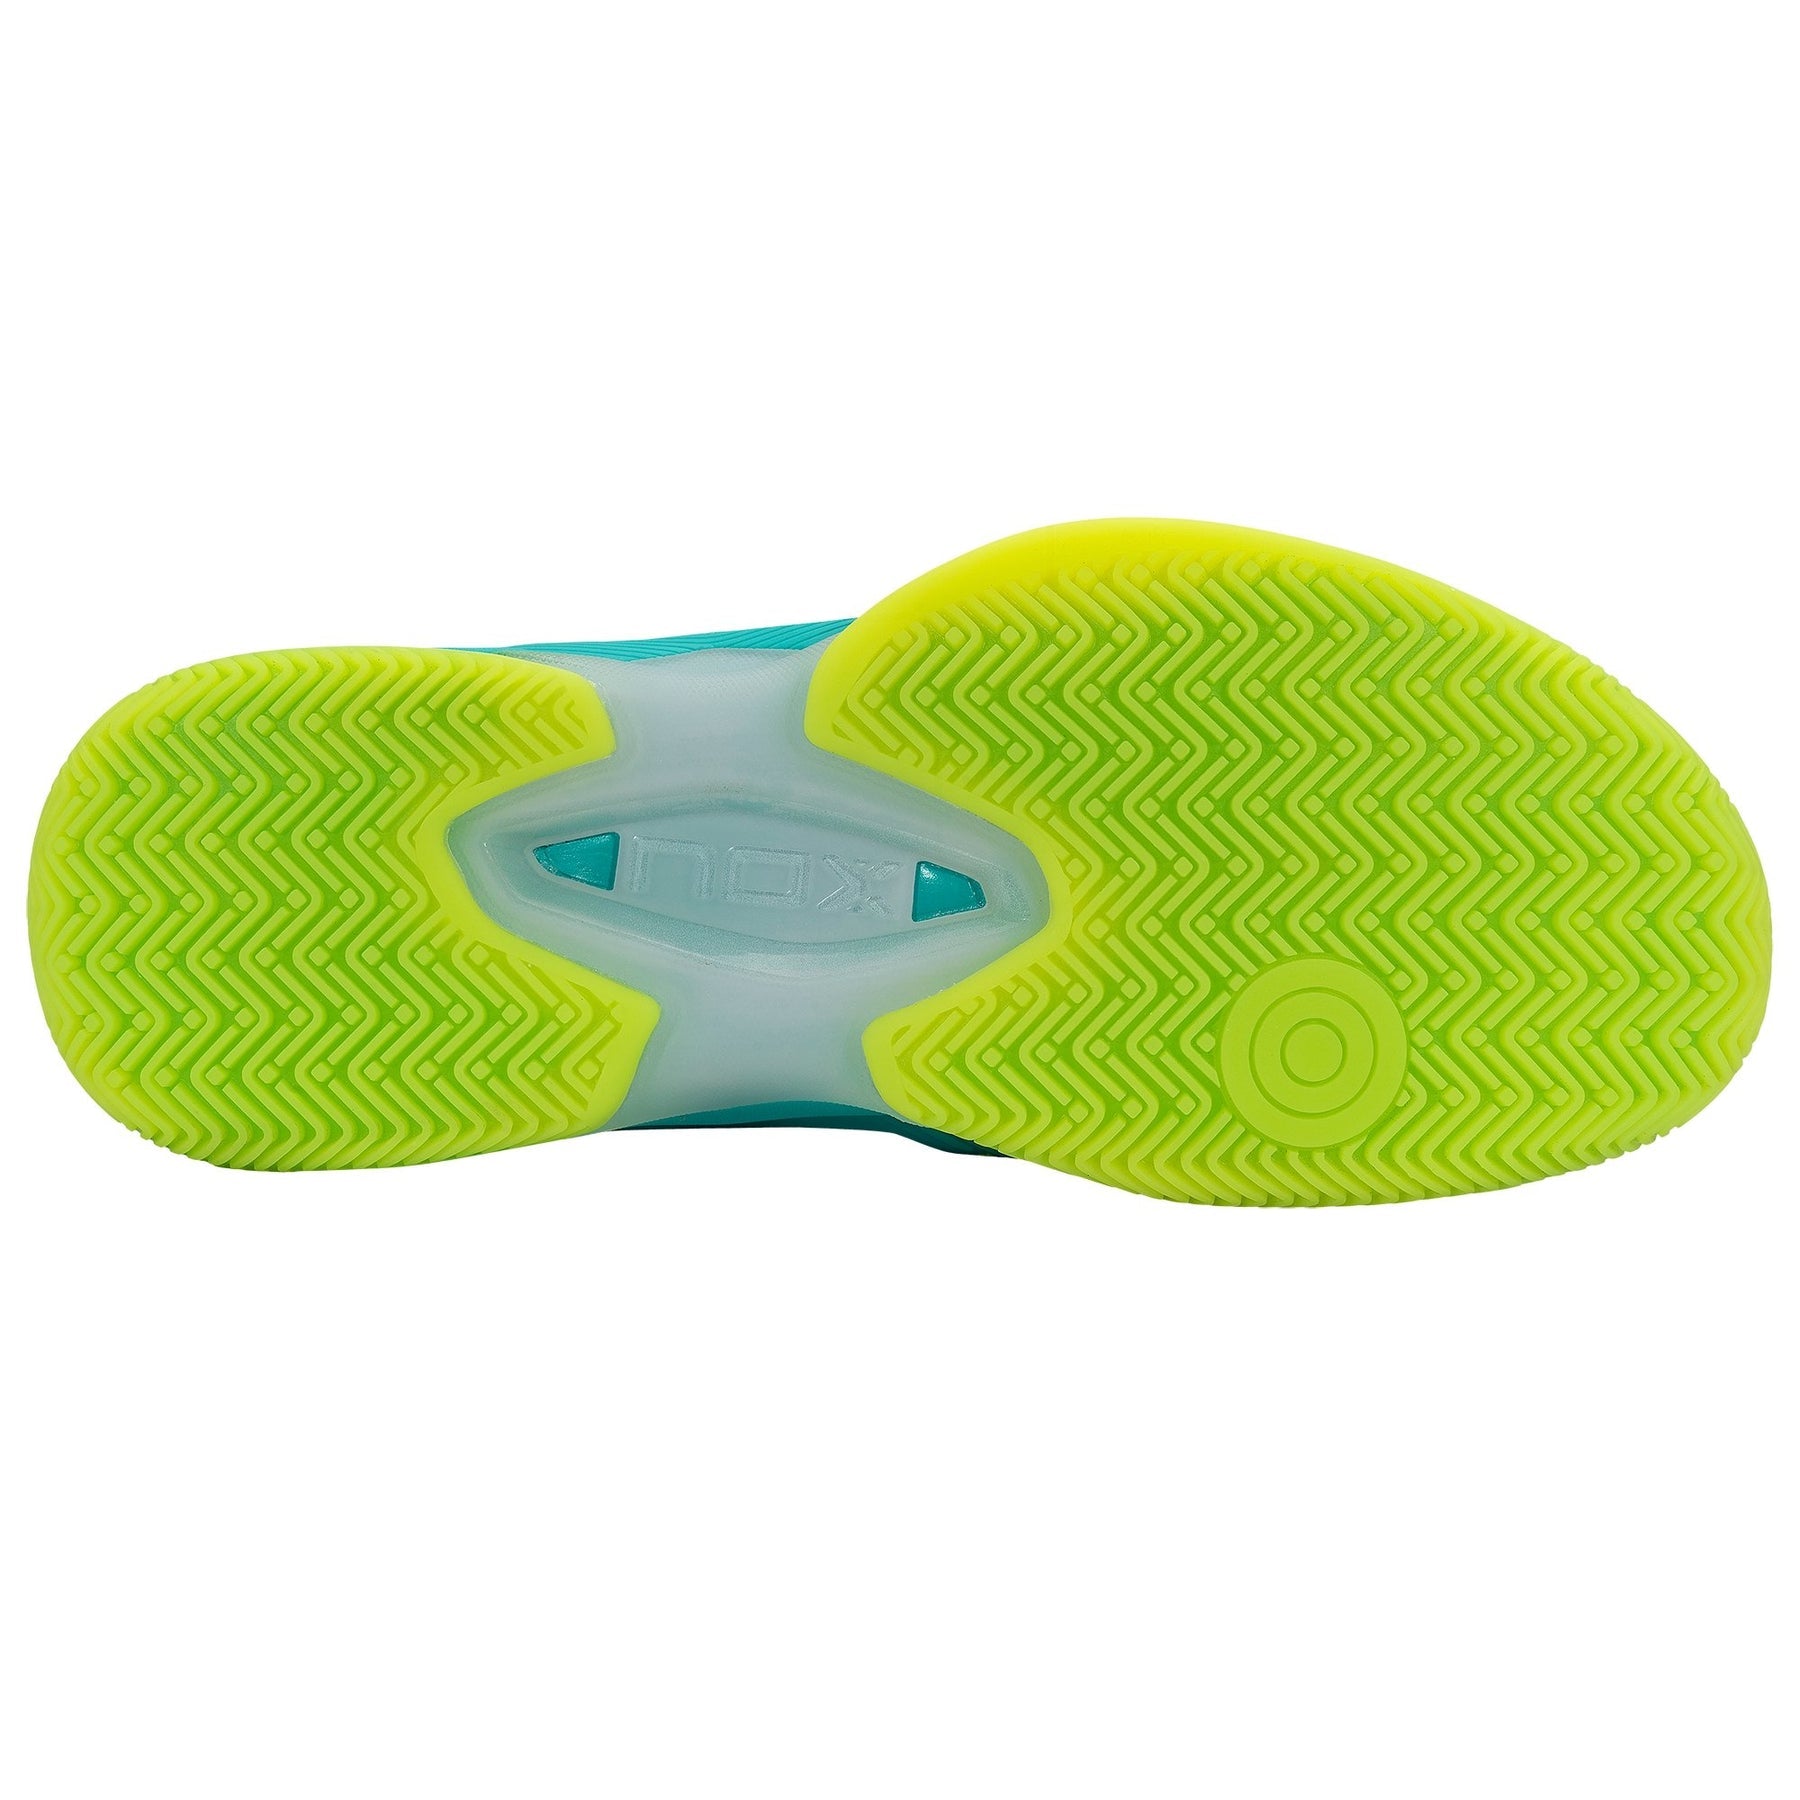 Nox AT10 Luxury Padel Shoes (Turquoise/Lime)